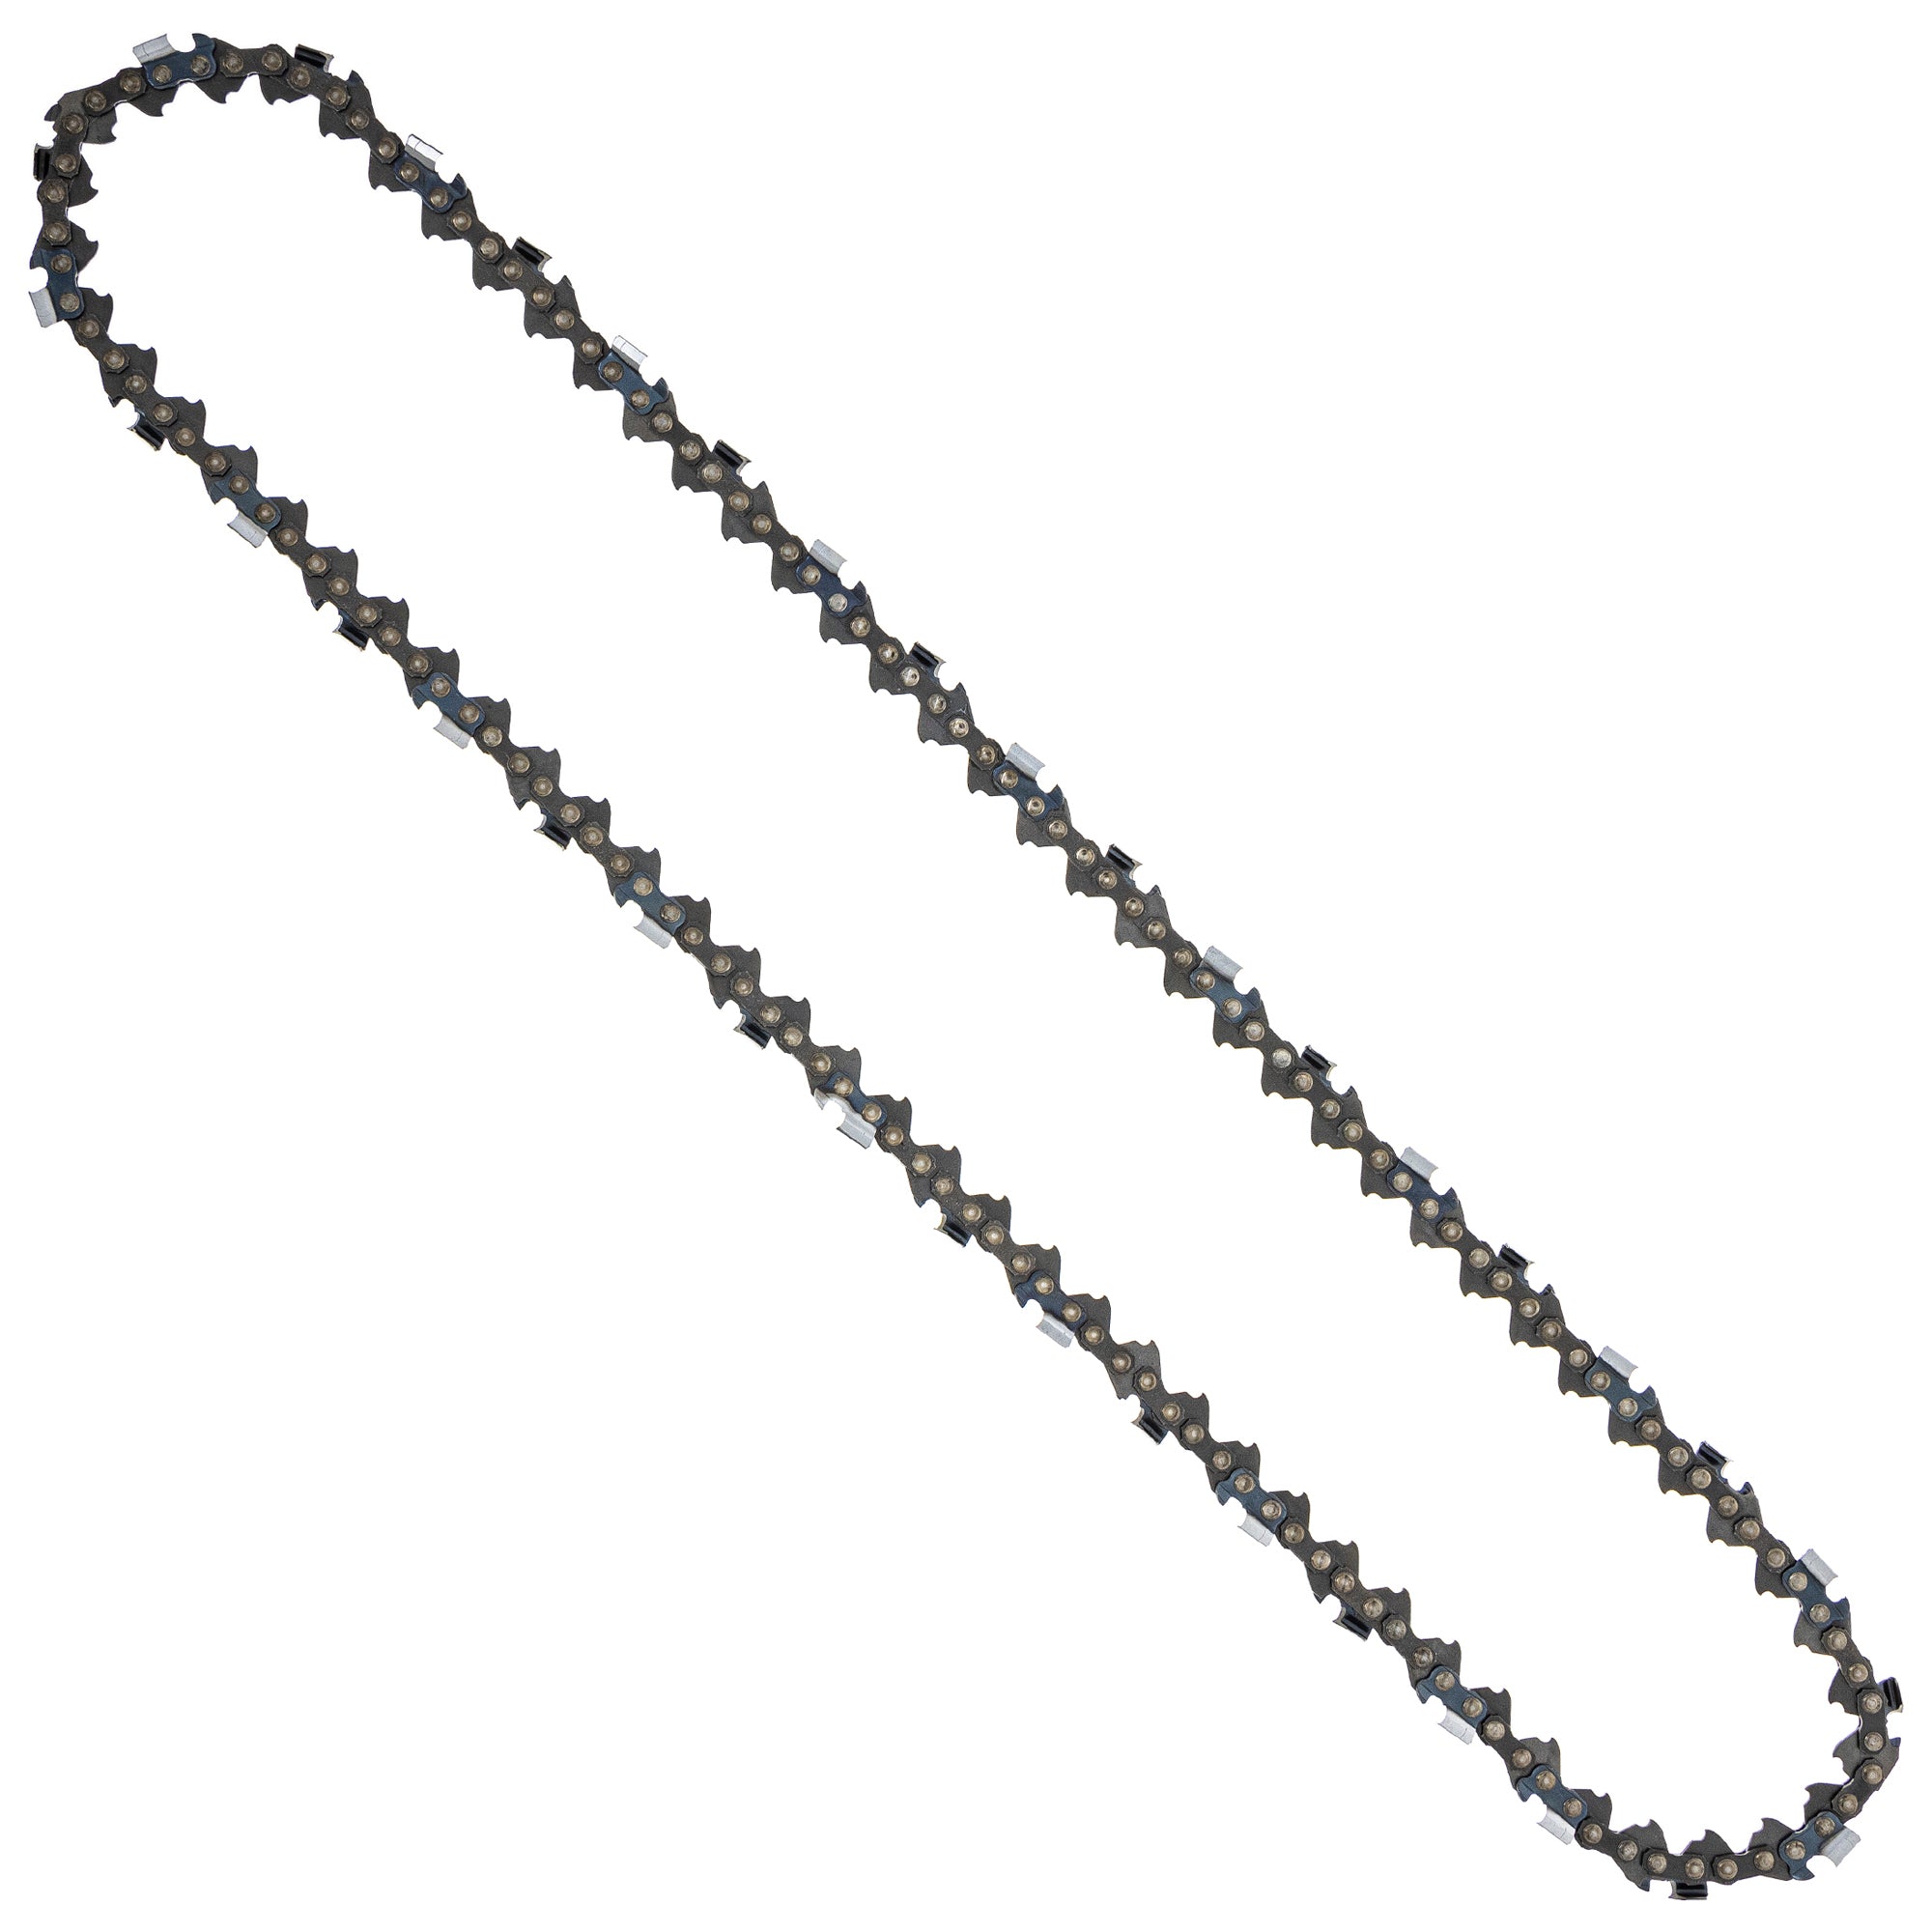 8TEN 810-CCC2398H Chain 6-Pack for zOTHER Oregon MS 634 30 040